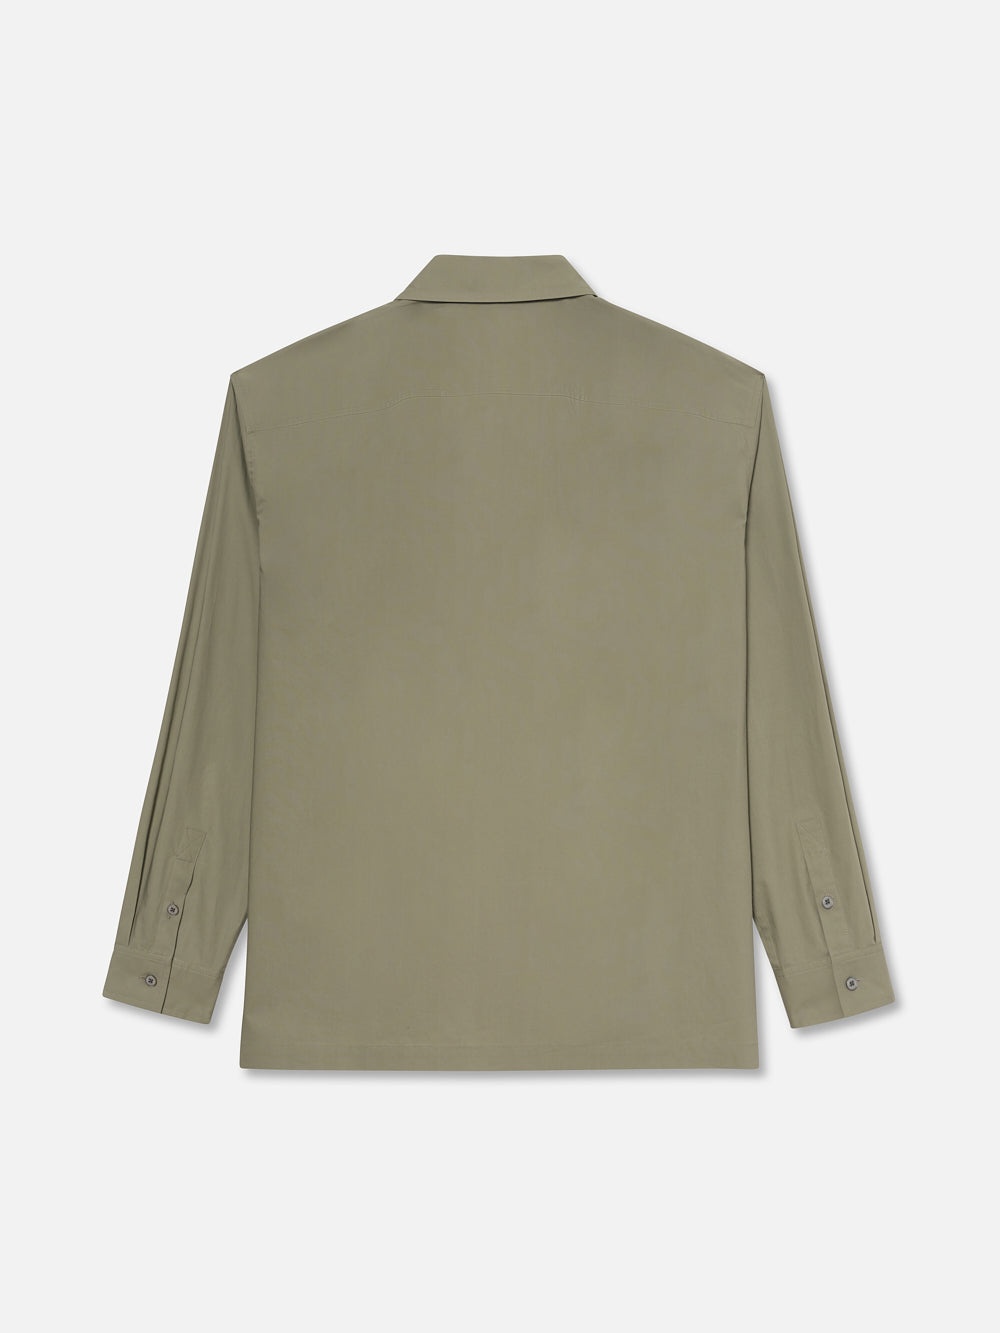 Military Shirt in Dry Sage - 3